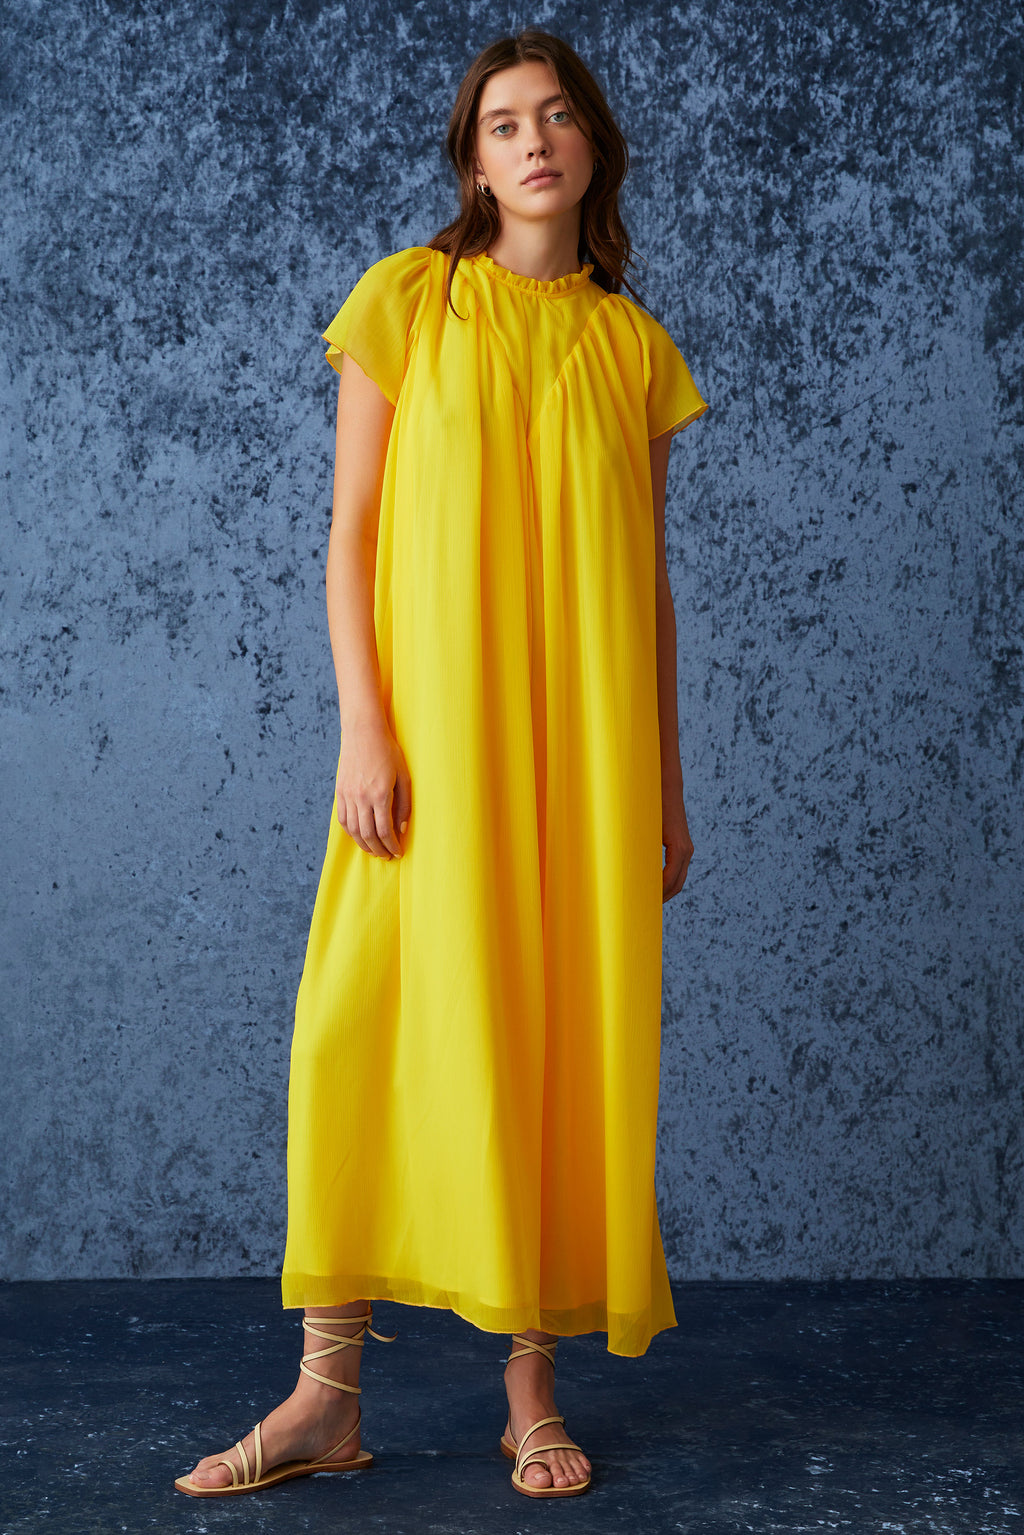 Golden yellow maxi dress with a straight silhouette and short sheer sleeves